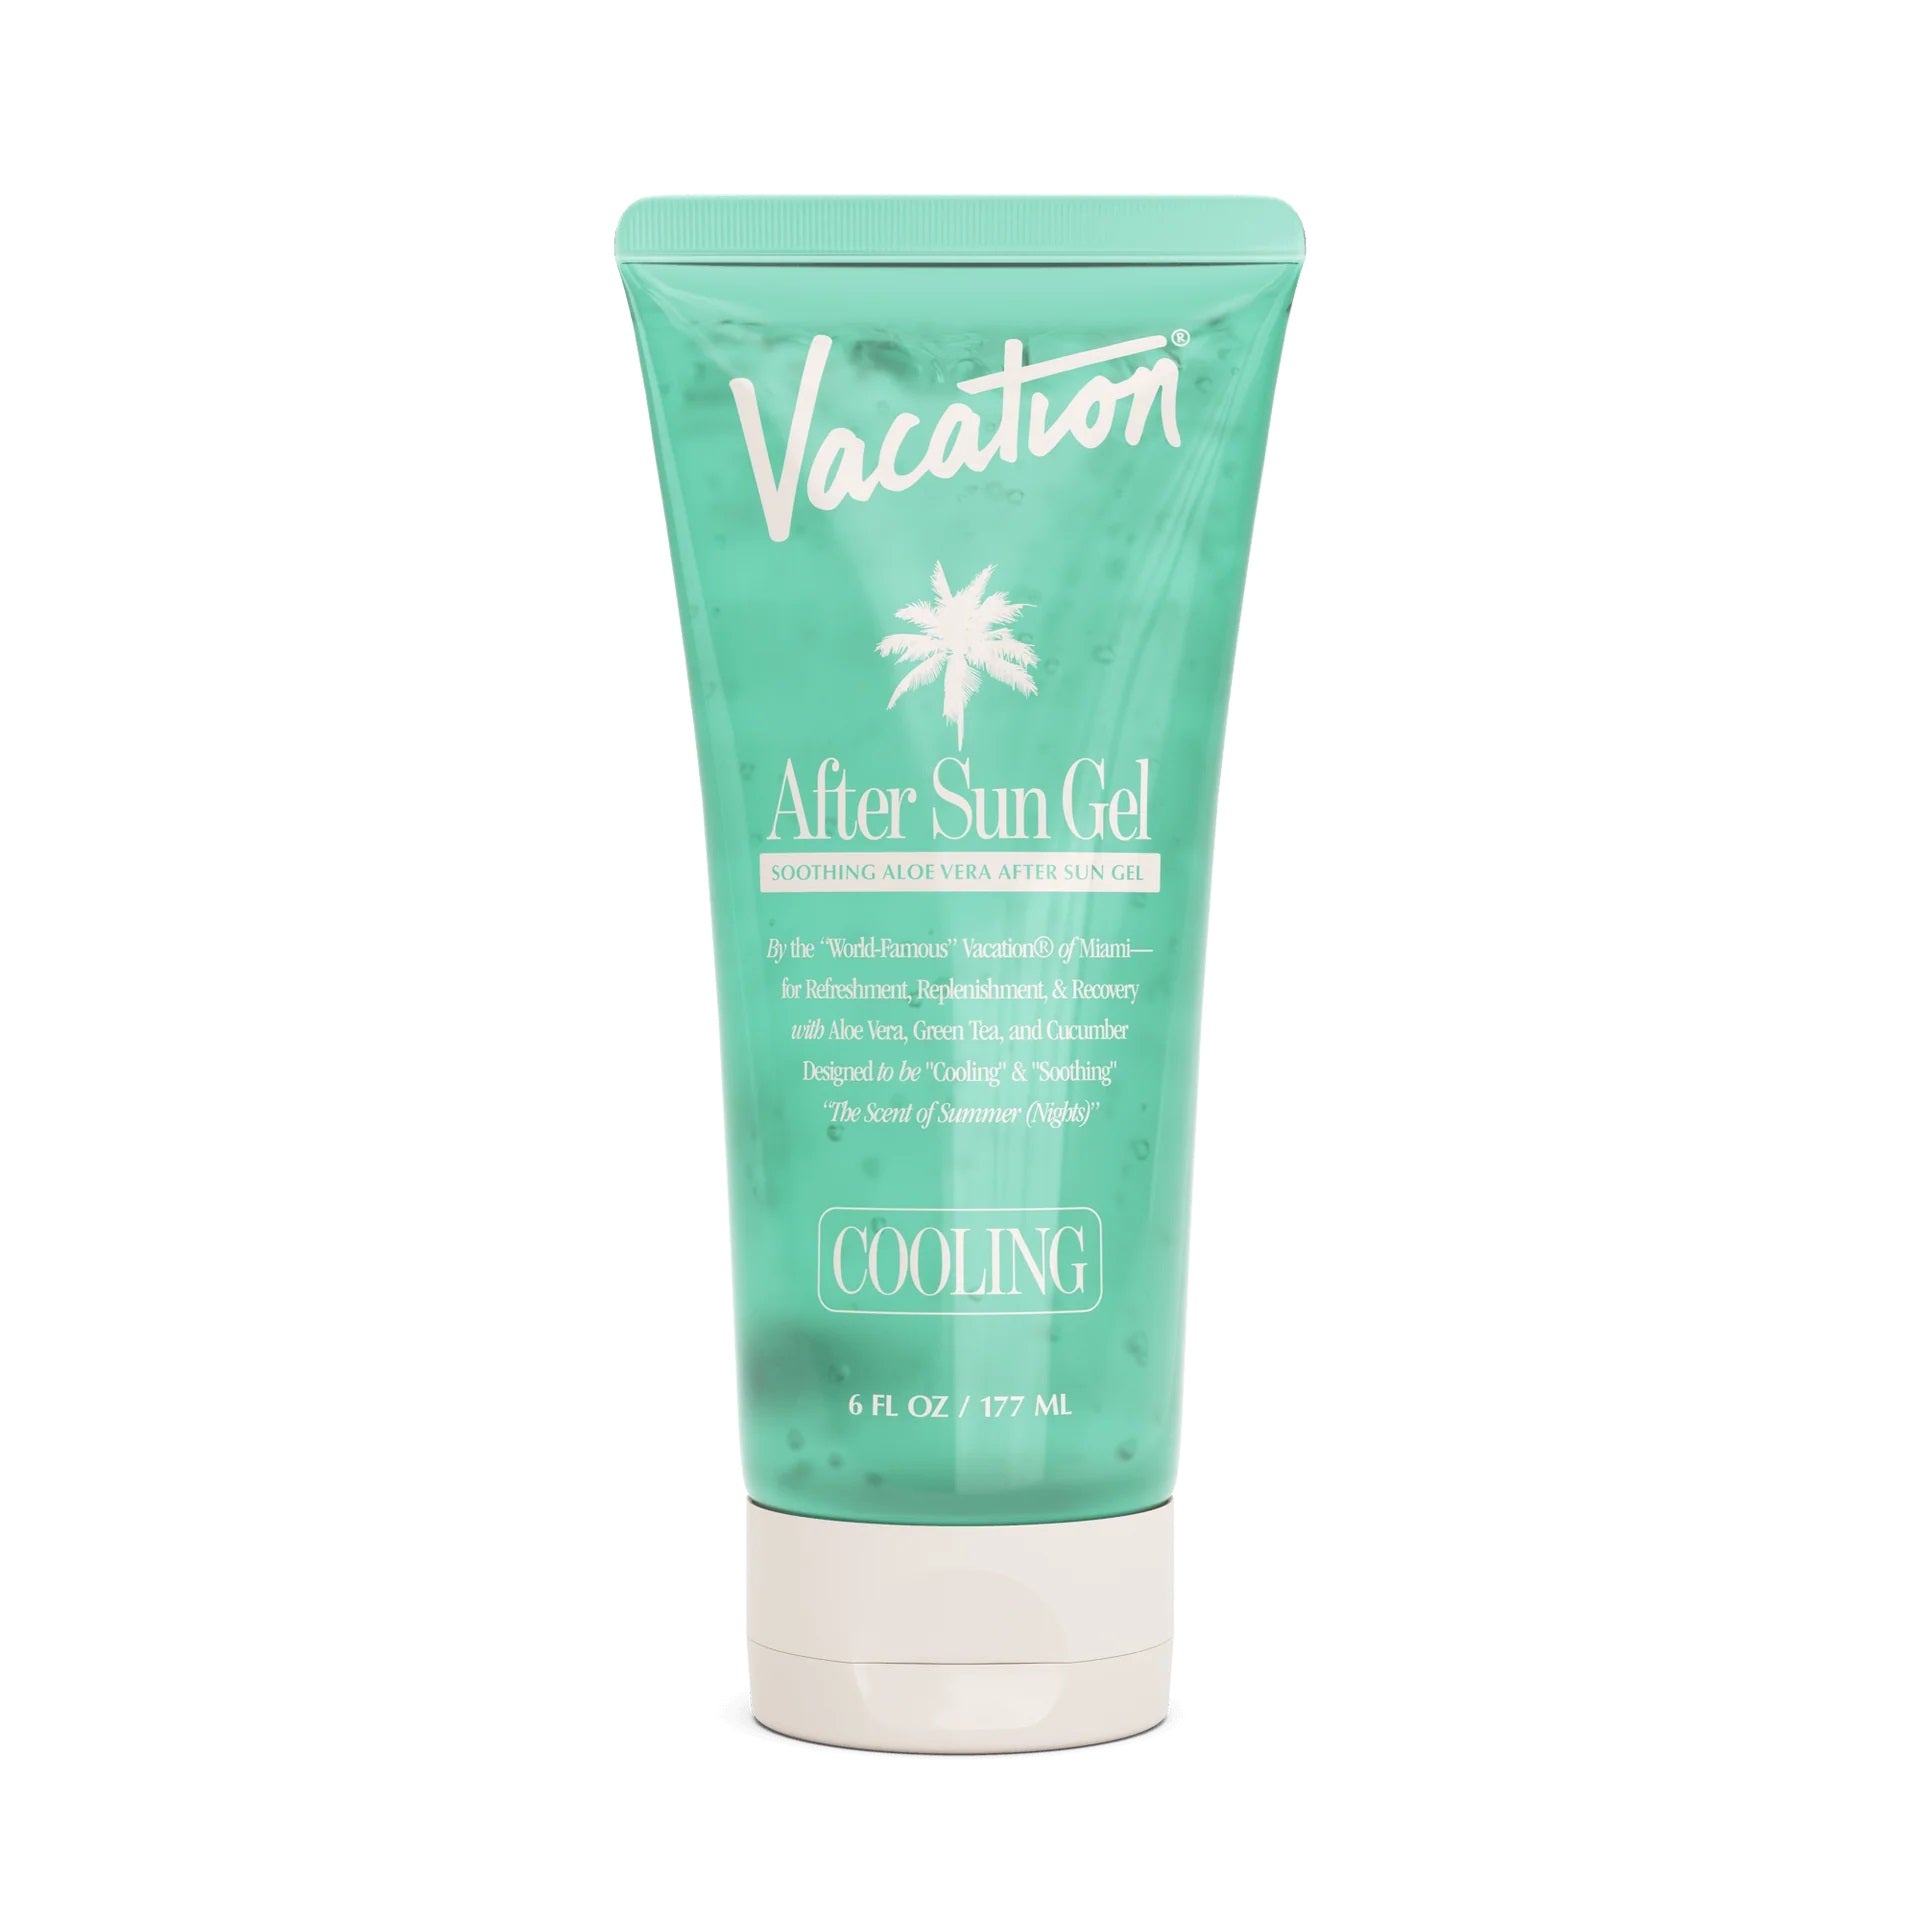 Vacation After Sun Gel 177ml